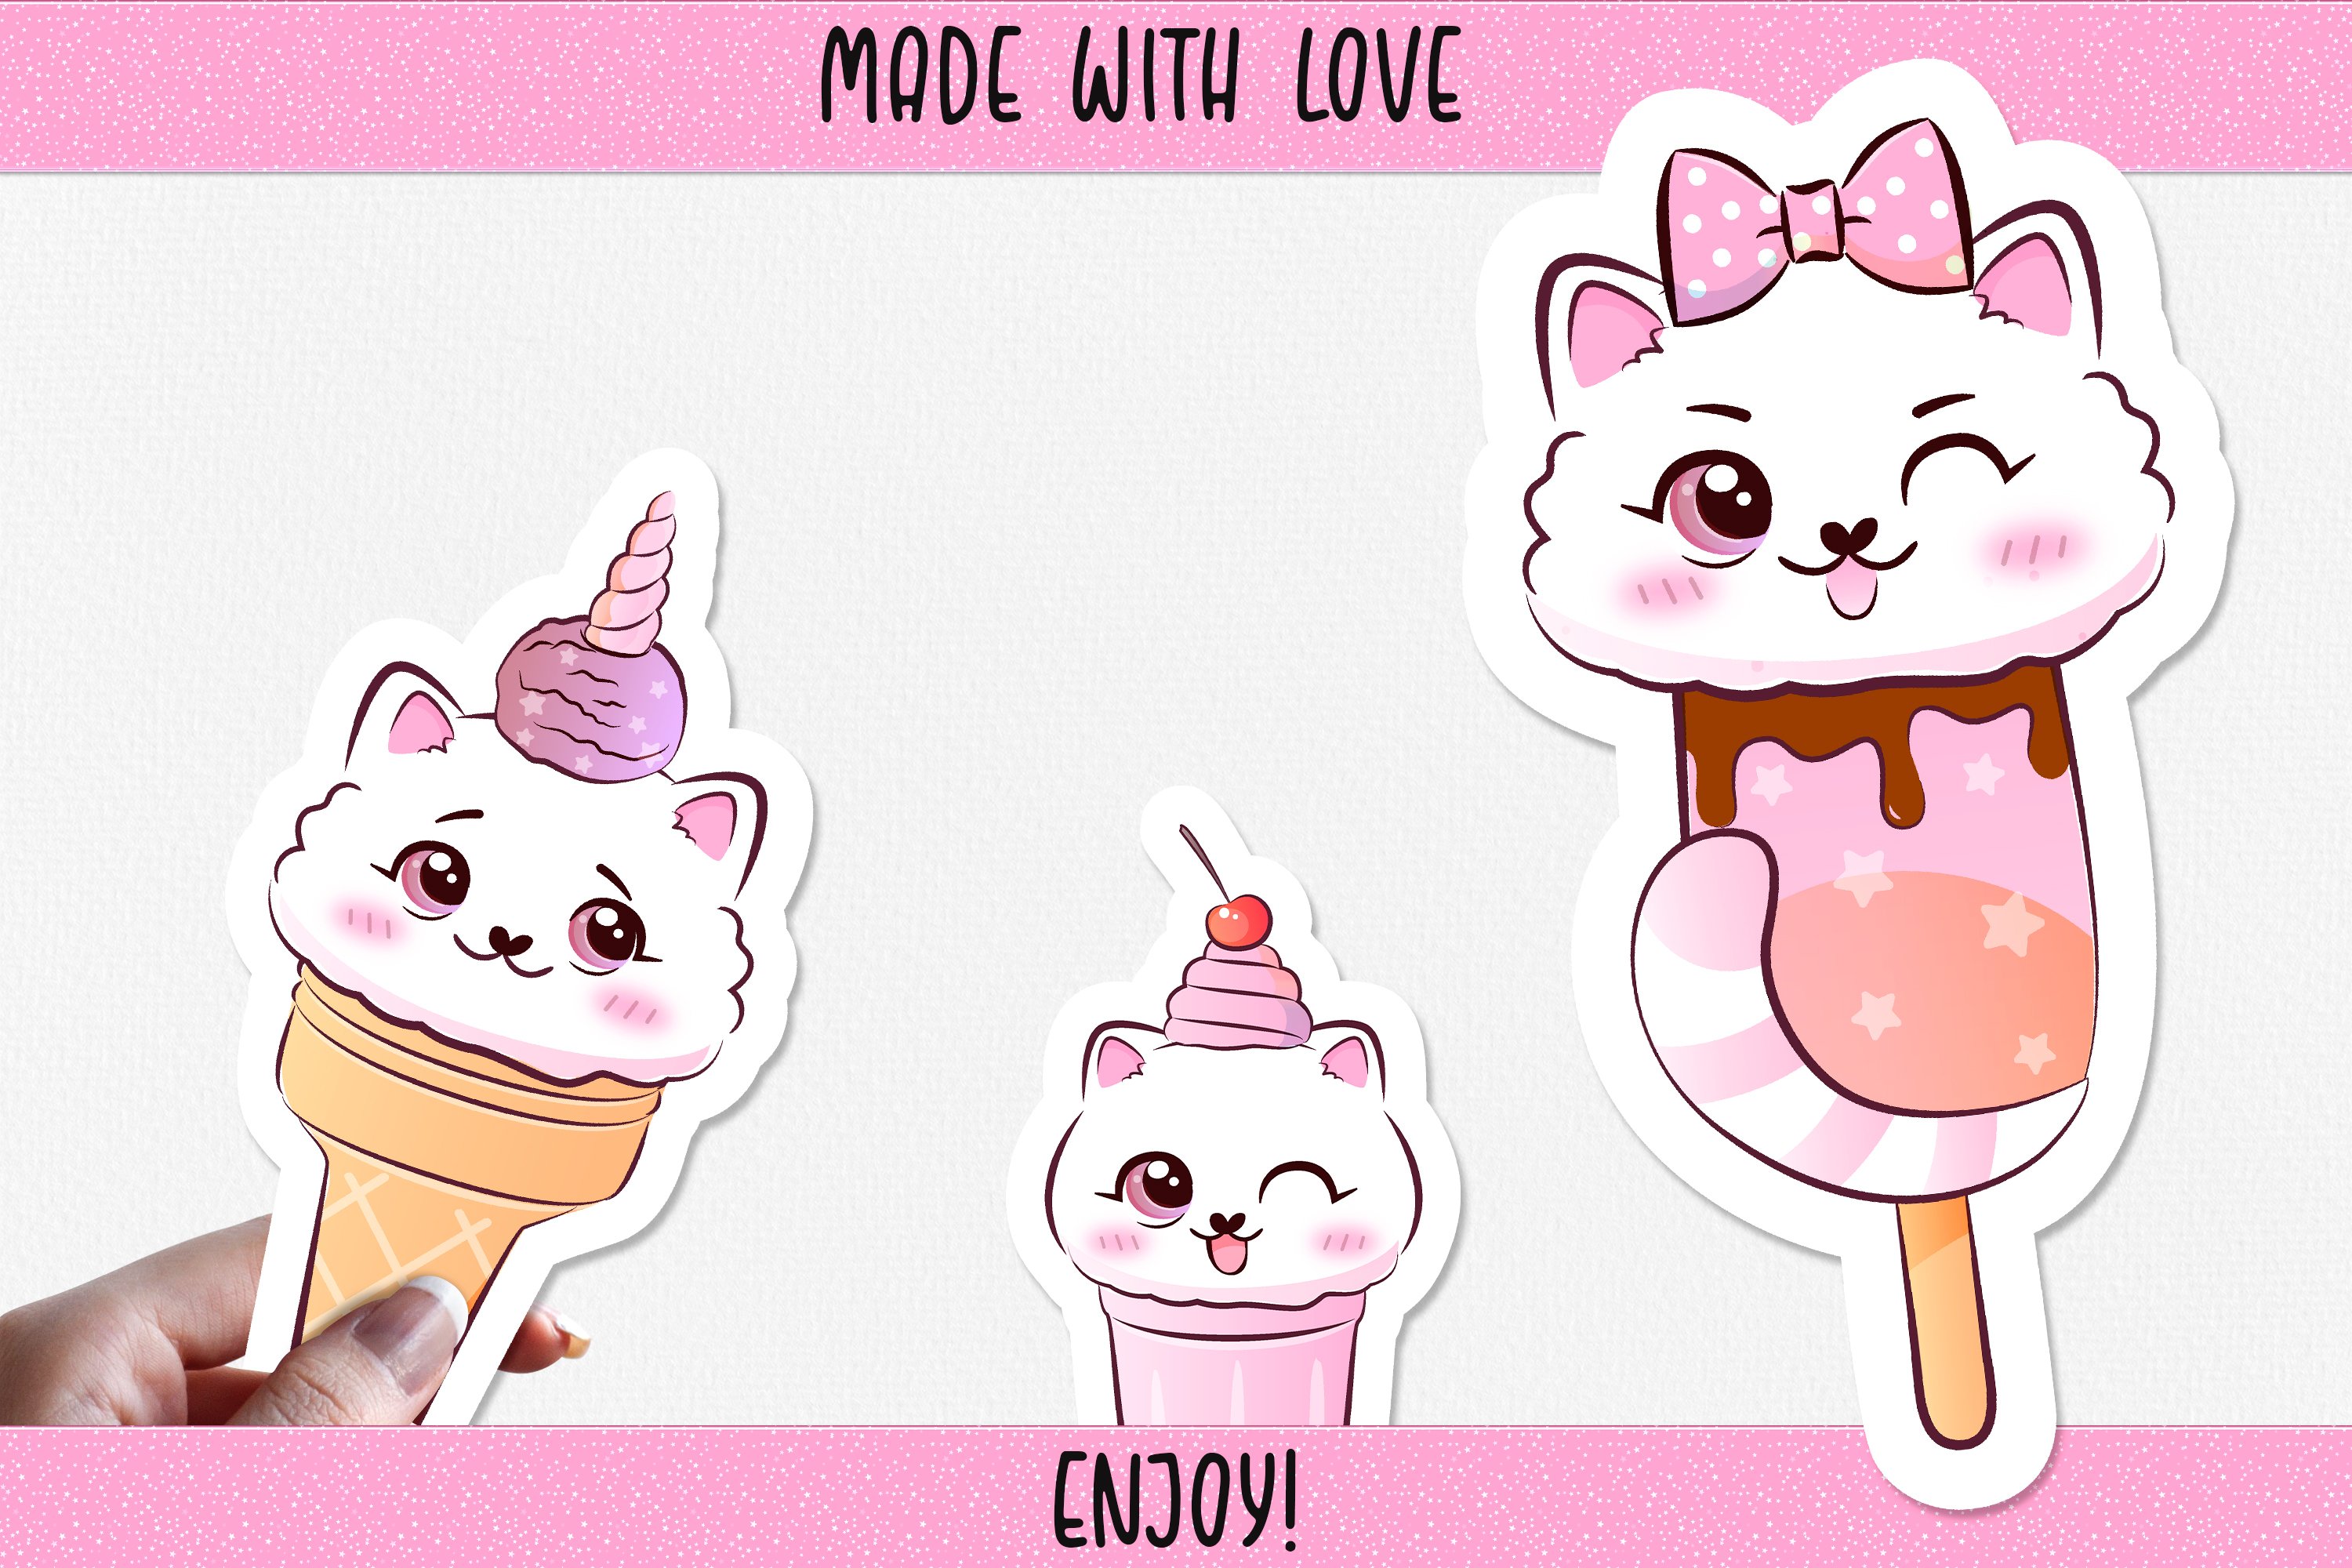 Kittens in waffle cones.